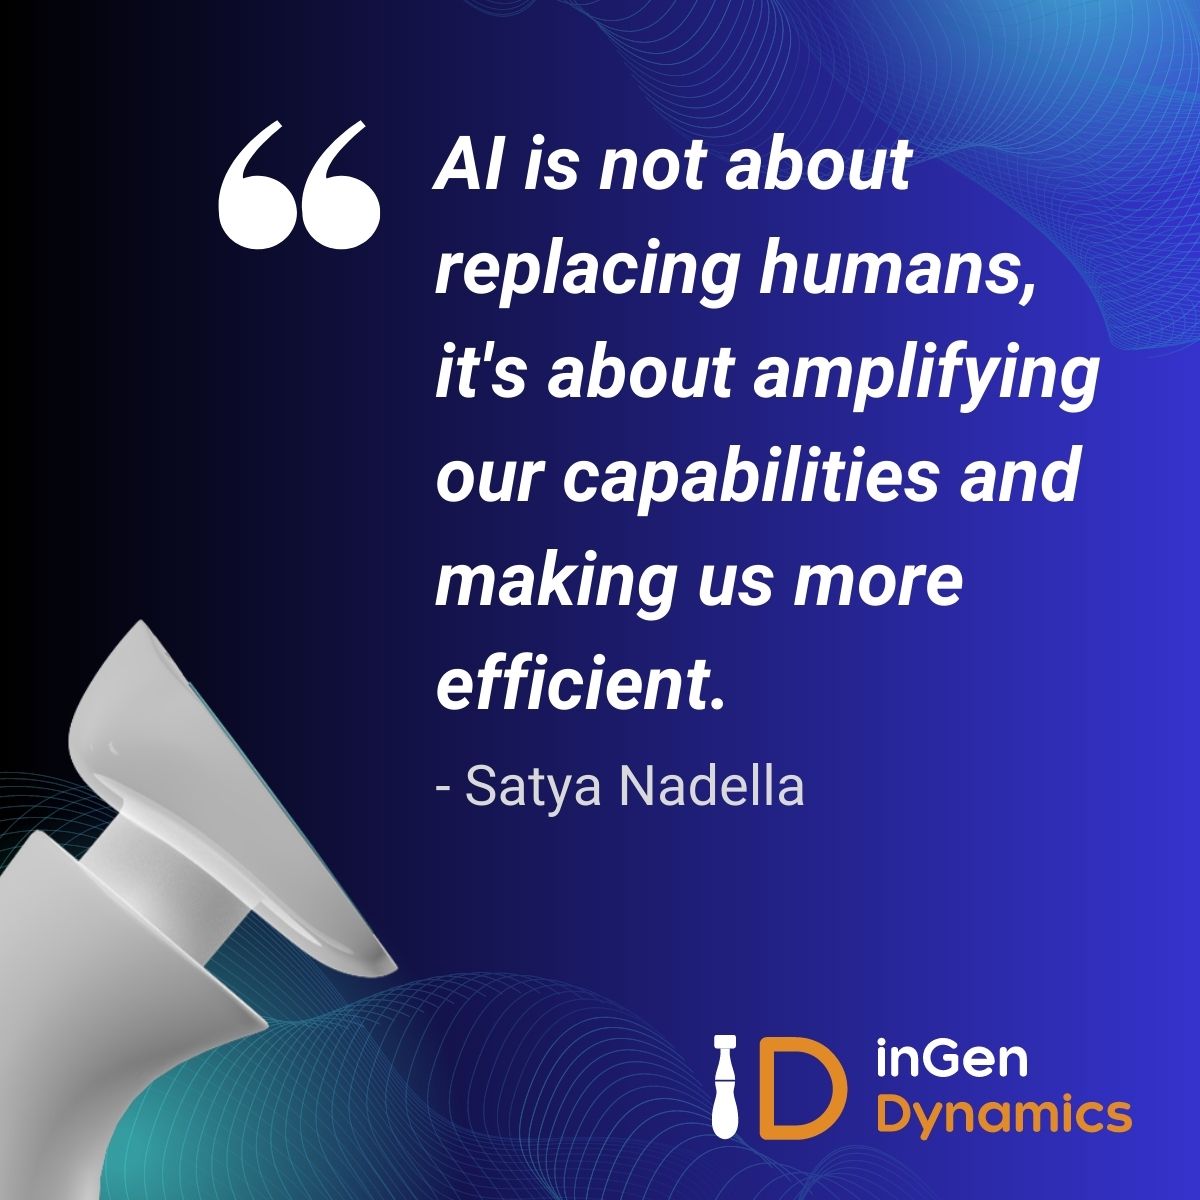 #AI is not about replacing humans, it's about amplifying our capabilities and making us more efficient. Let's use this technology to our advantage!

#Robotics #SmartAutomation #BuildingTheFuture #inGenDynamics